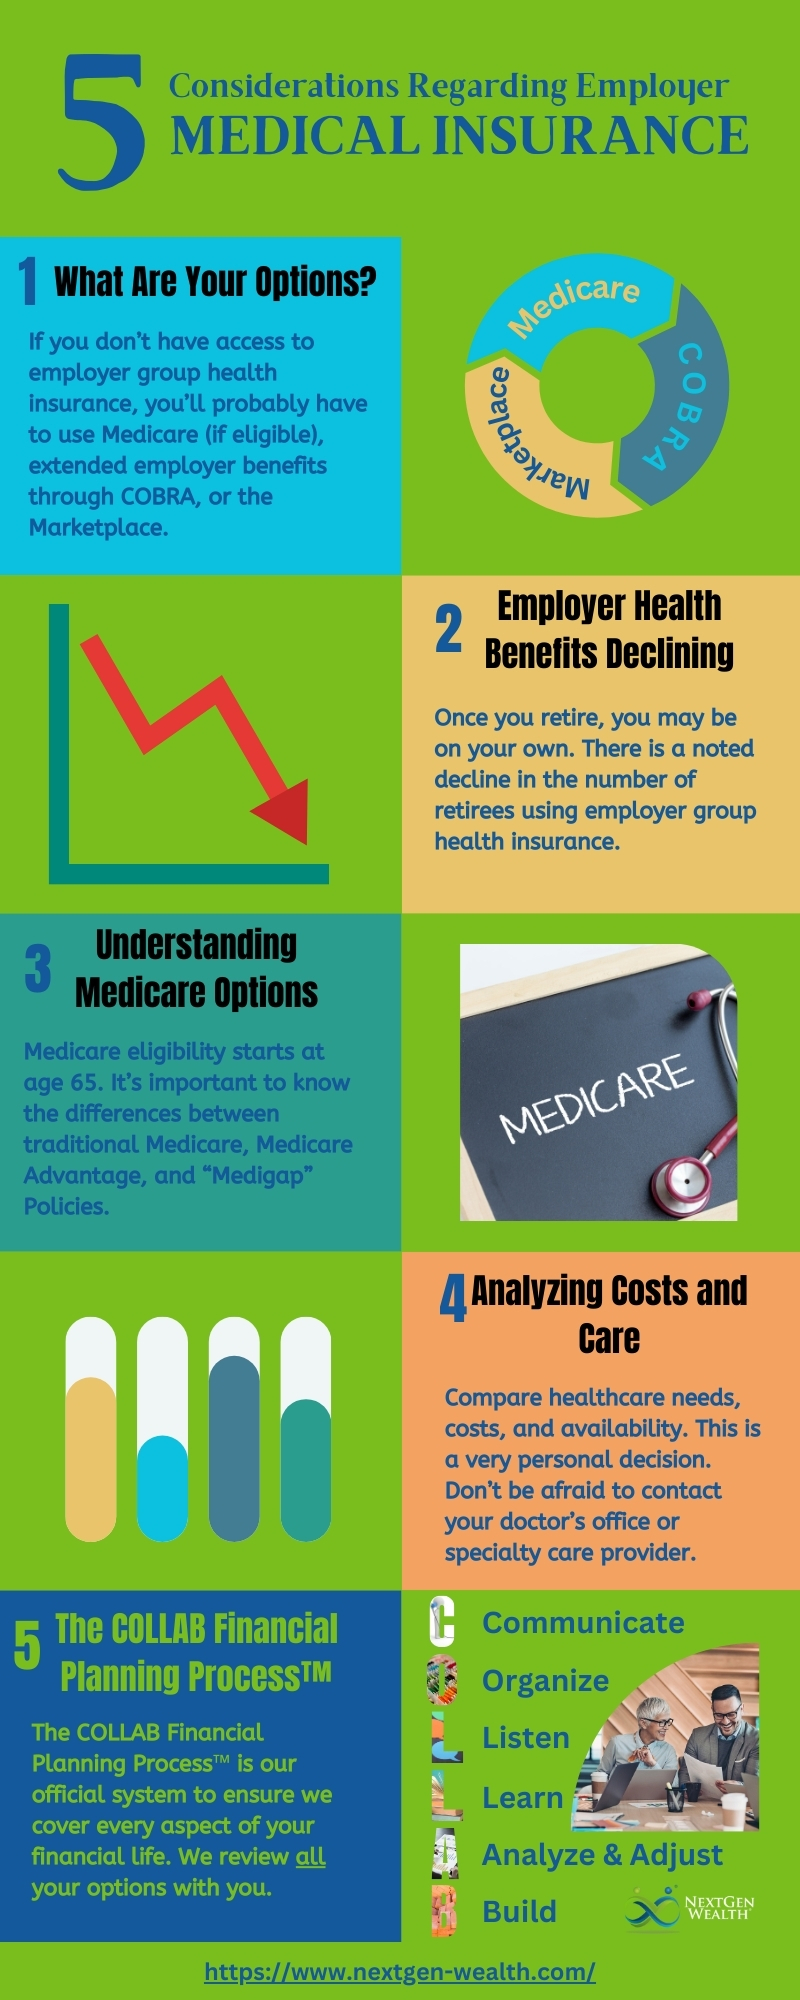 Infographic Should I Keep My Employer Life and Health Insurance Policies When I Retire